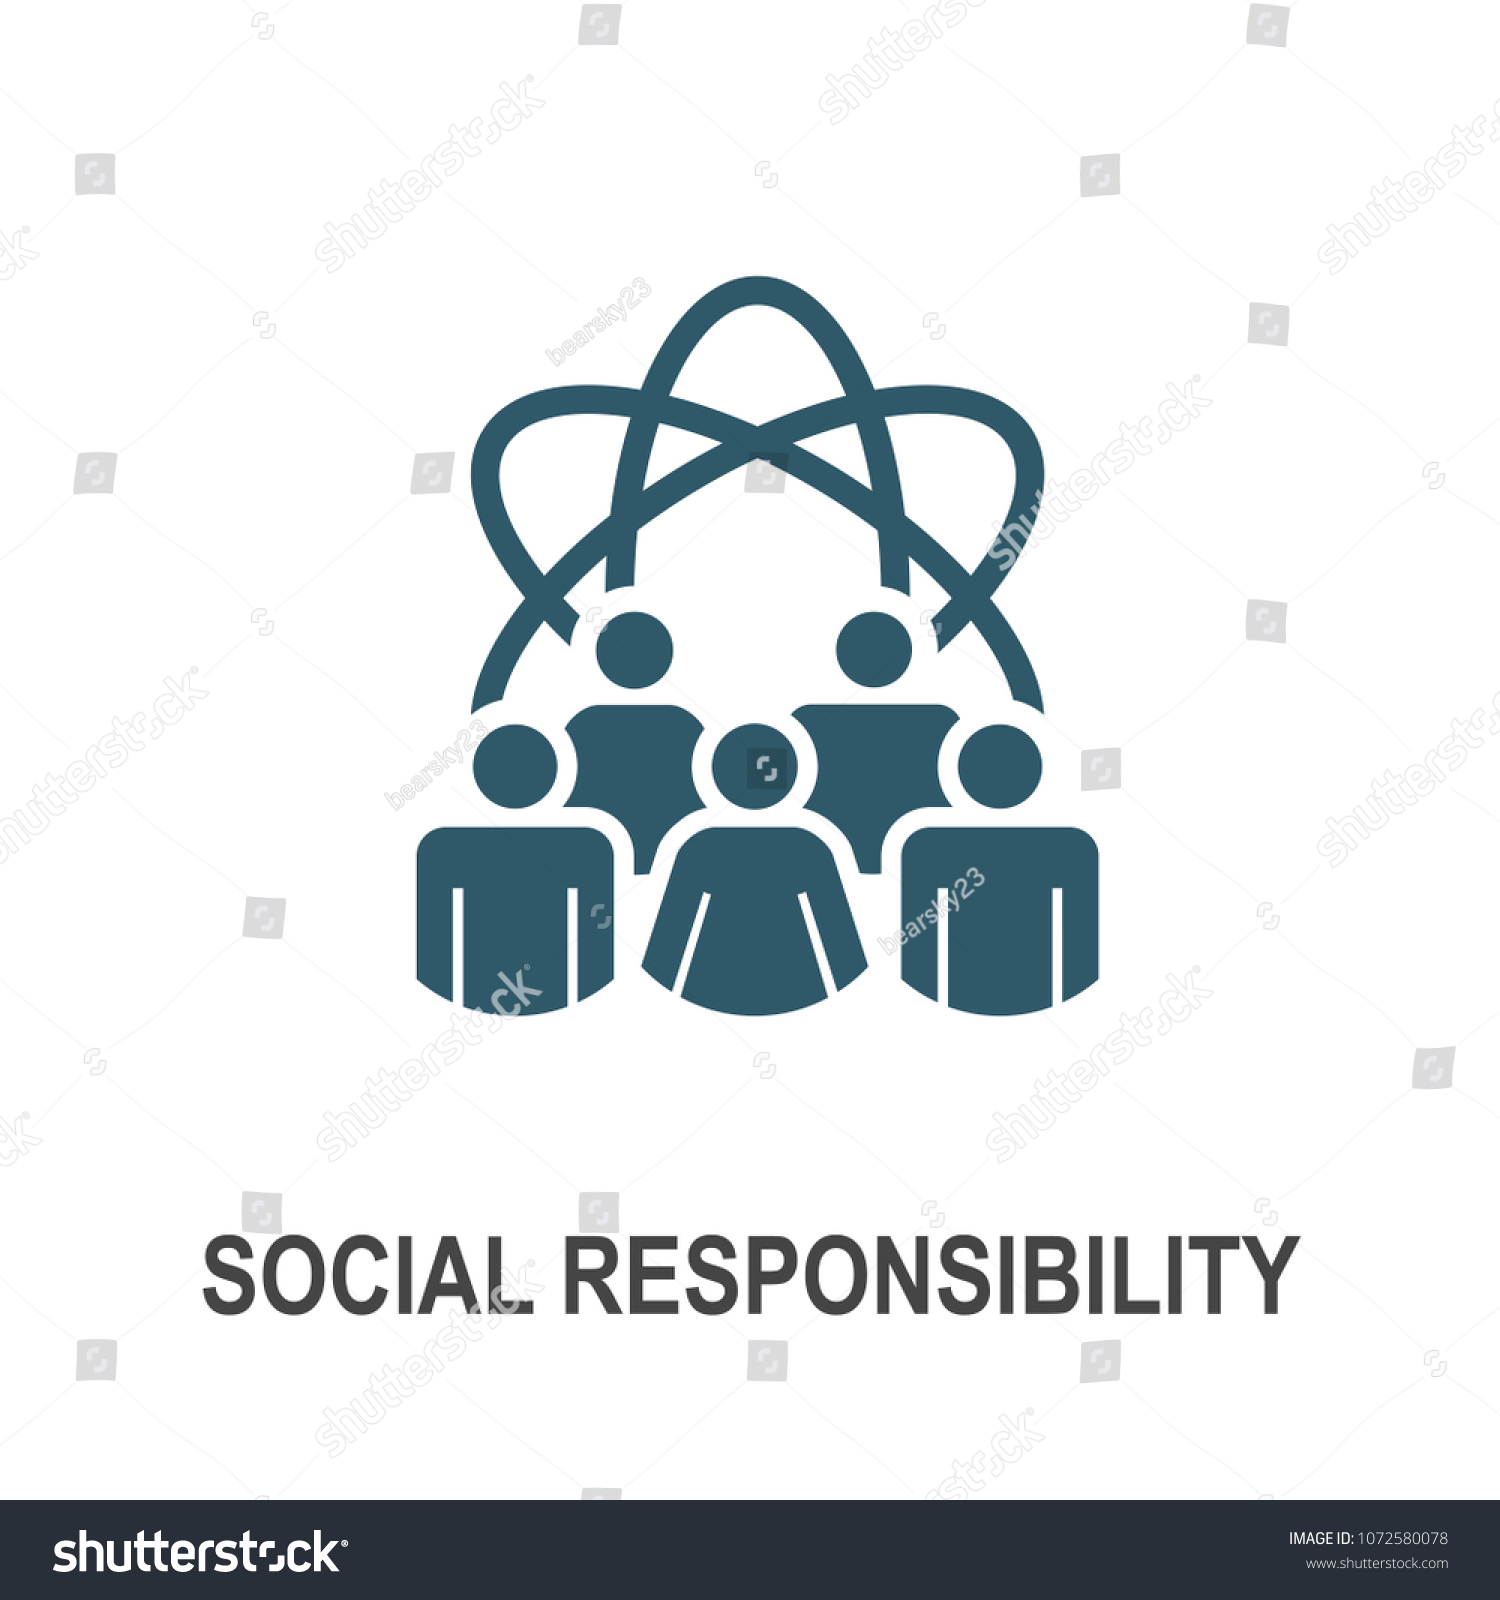 Corporate Social Responsibility Icon Images Stock Photos Vectors Shutterstock